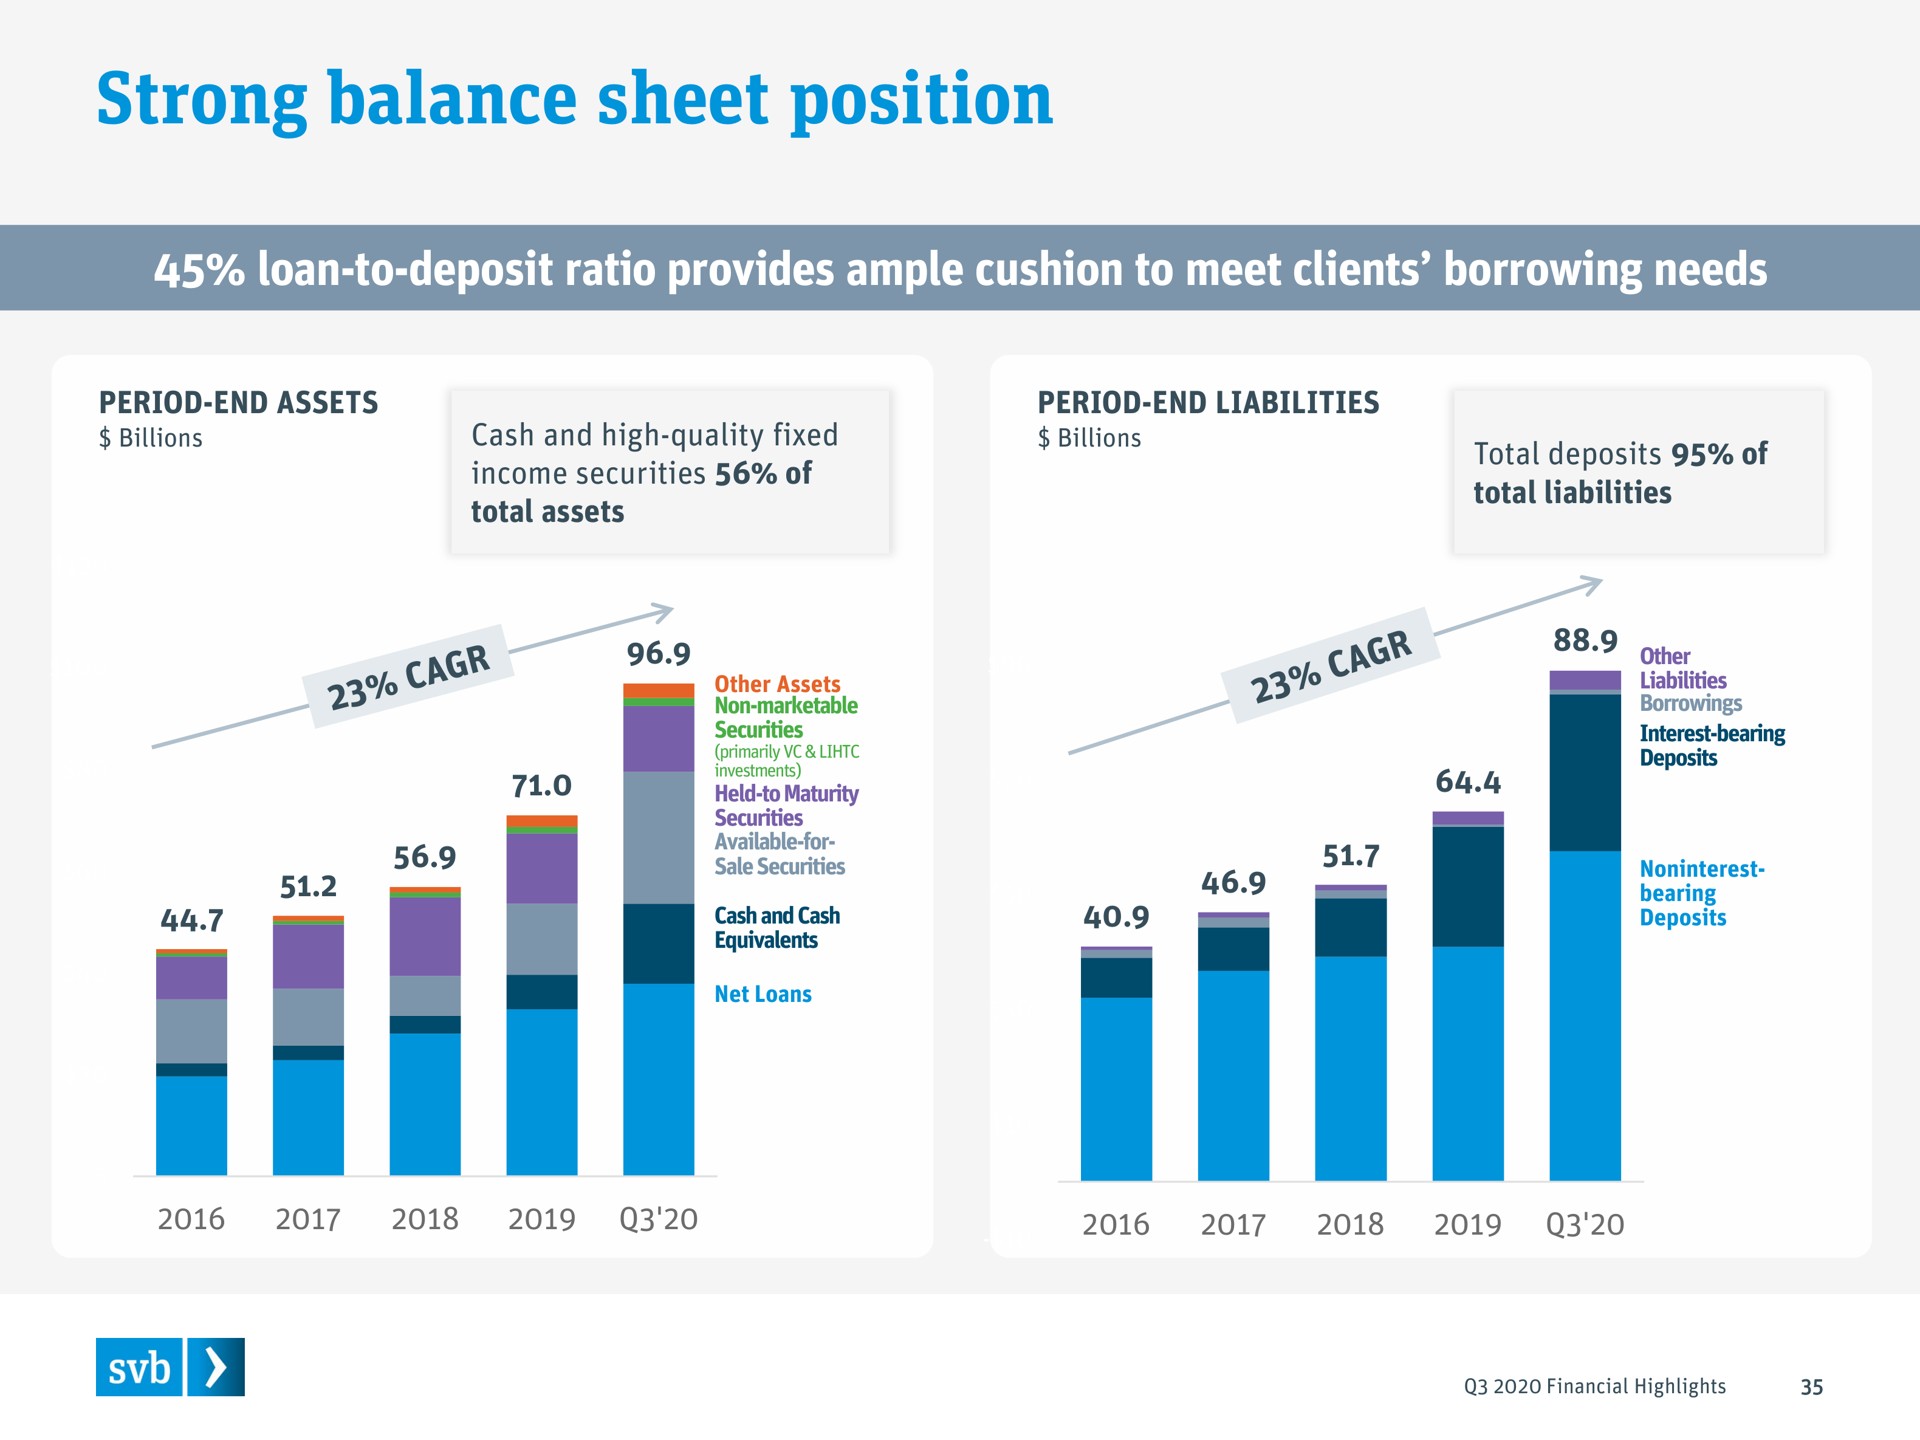 strong balance sheet position loan to deposit ratio provides ample cushion to meet clients borrowing needs cores | Silicon Valley Bank